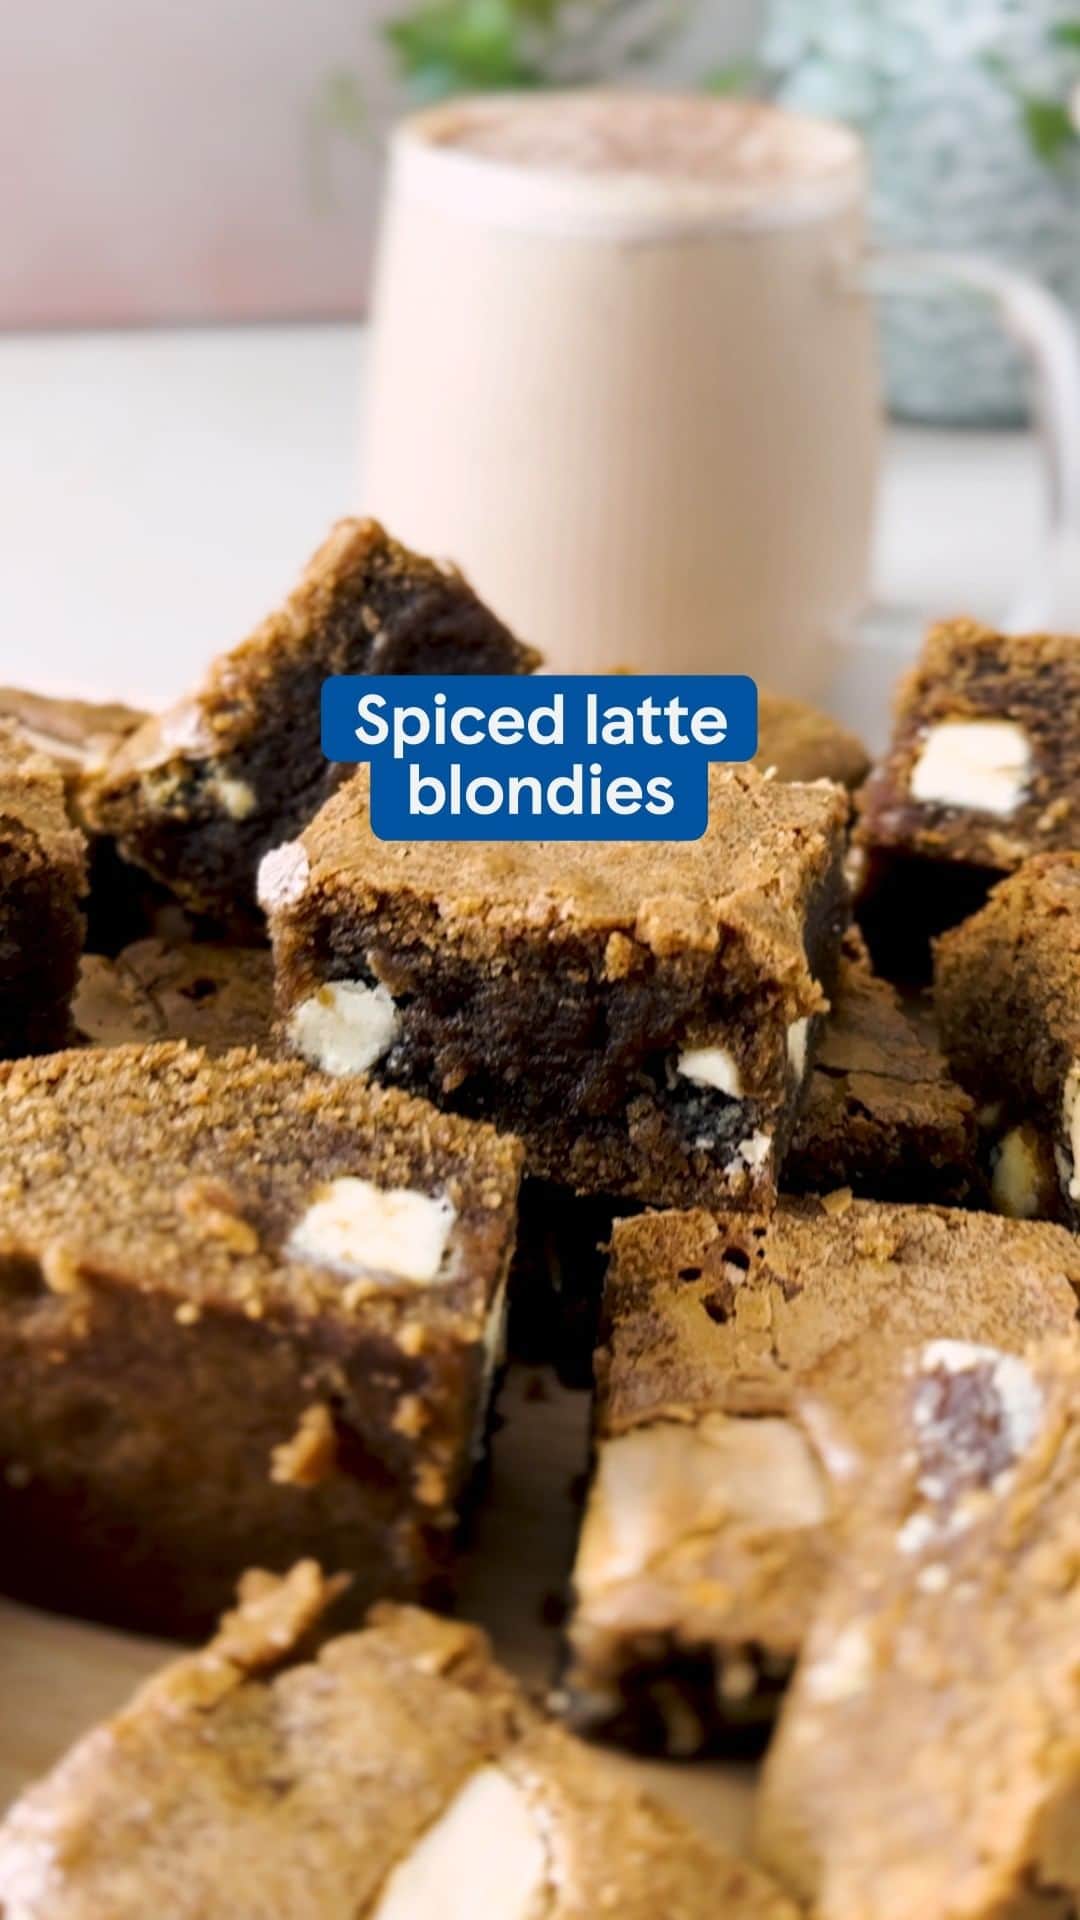 Tesco Food Officialのインスタグラム：「It’s officially spiced latte season 🍁🍂 And now you can enjoy your favourite autumnal treat as a bake! These blondies are flavoured with a hint of coffee and spiced with cinnamon, ginger and nutmeg. Head to the link in bio for the recipe.」